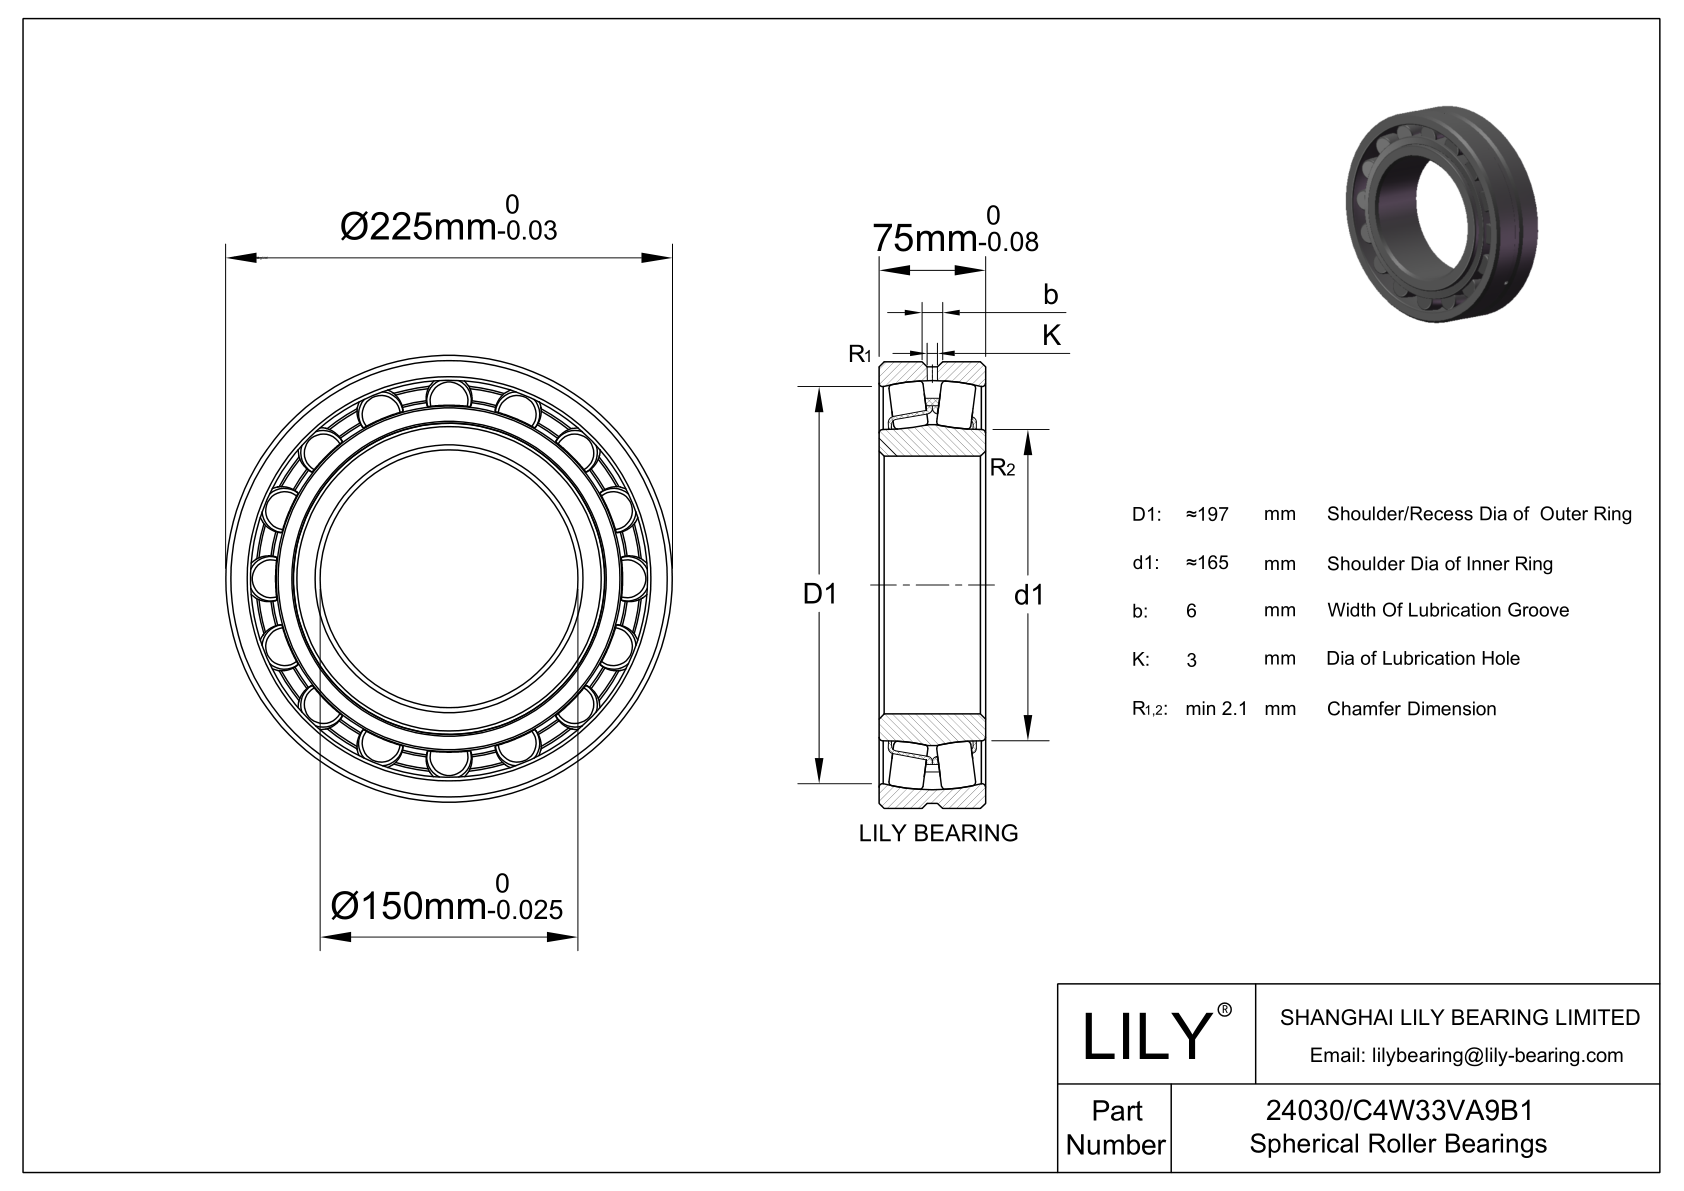 24030/C4W33VA9B1 Double Row Spherical Roller Bearing cad drawing